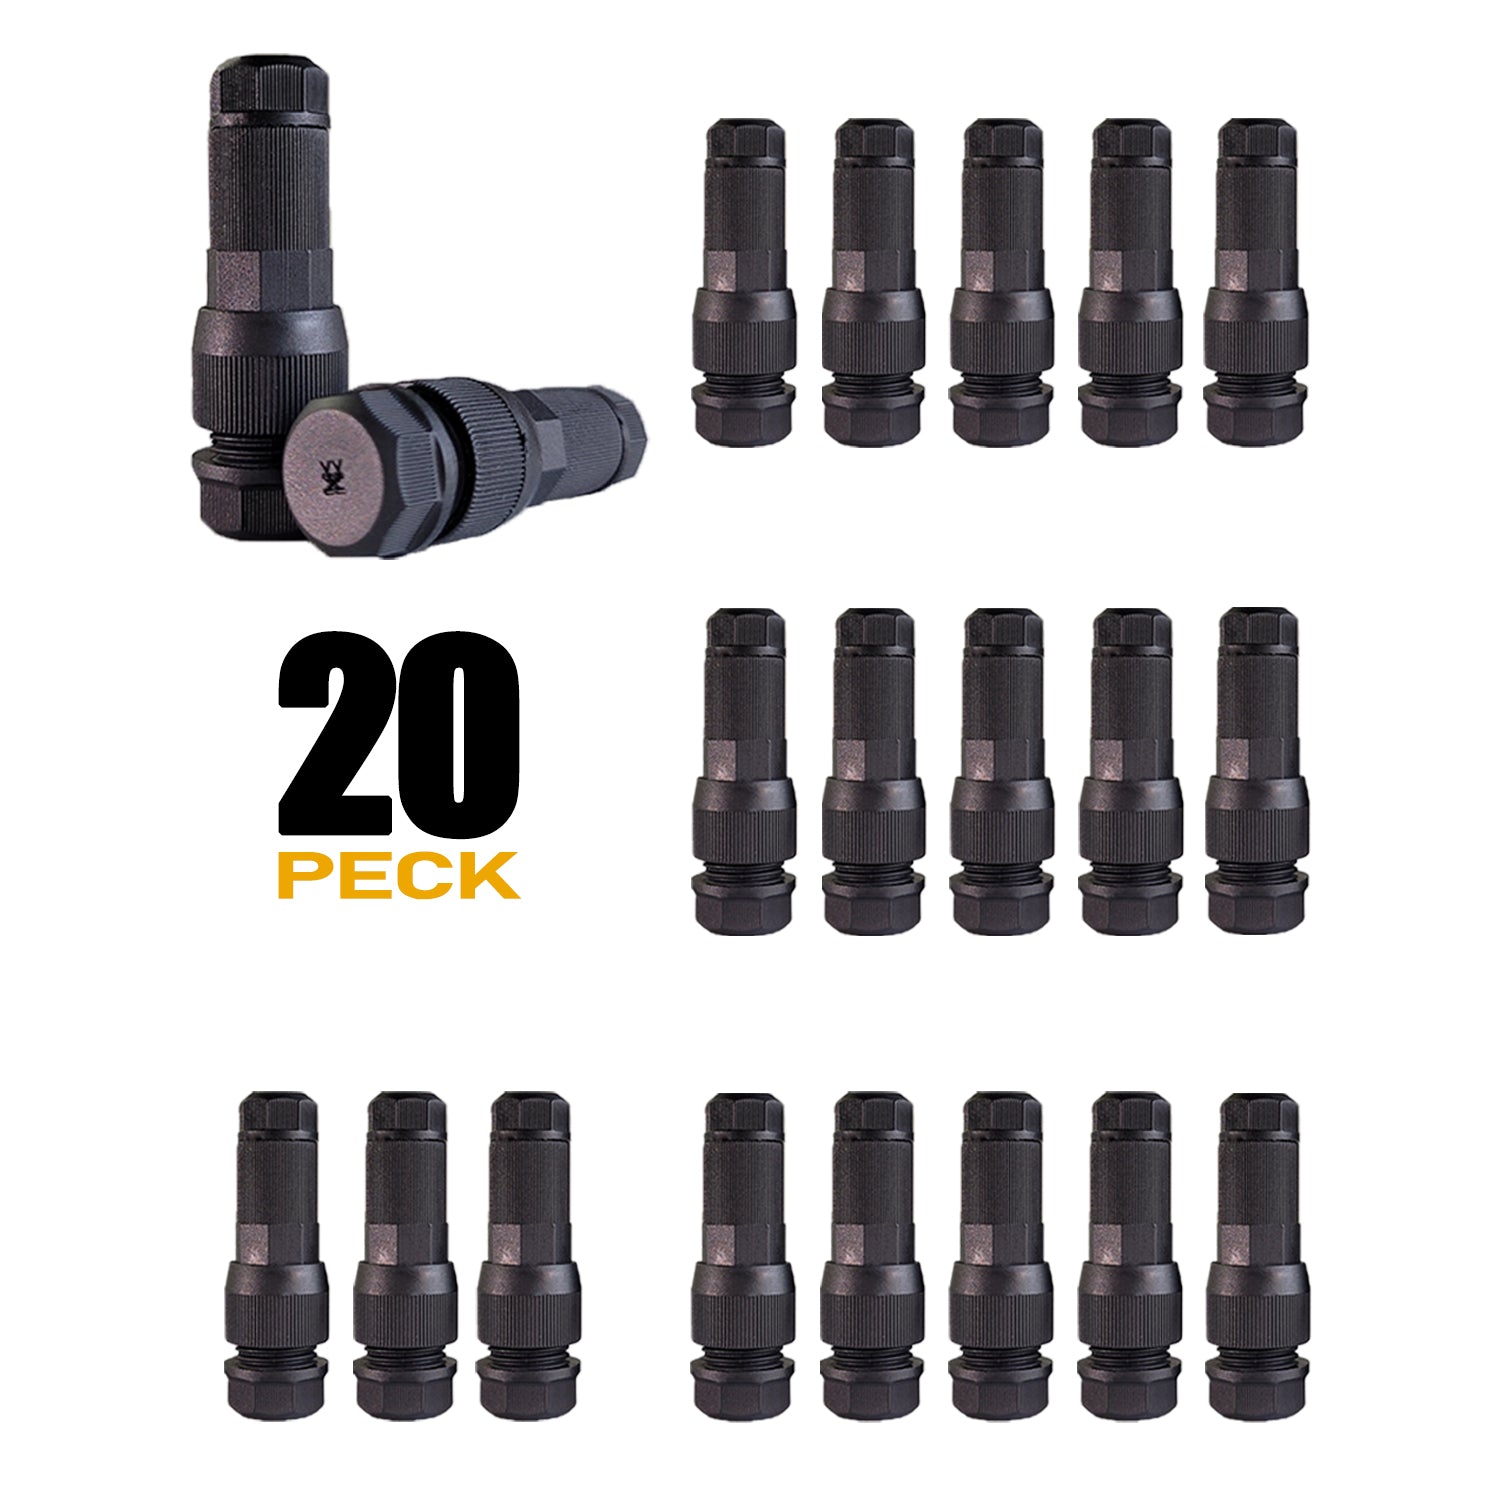 Twenty-pack of black low voltage wire tap connectors for 12-20 gauge landscape lighting cable, arranged neatly with quantity label